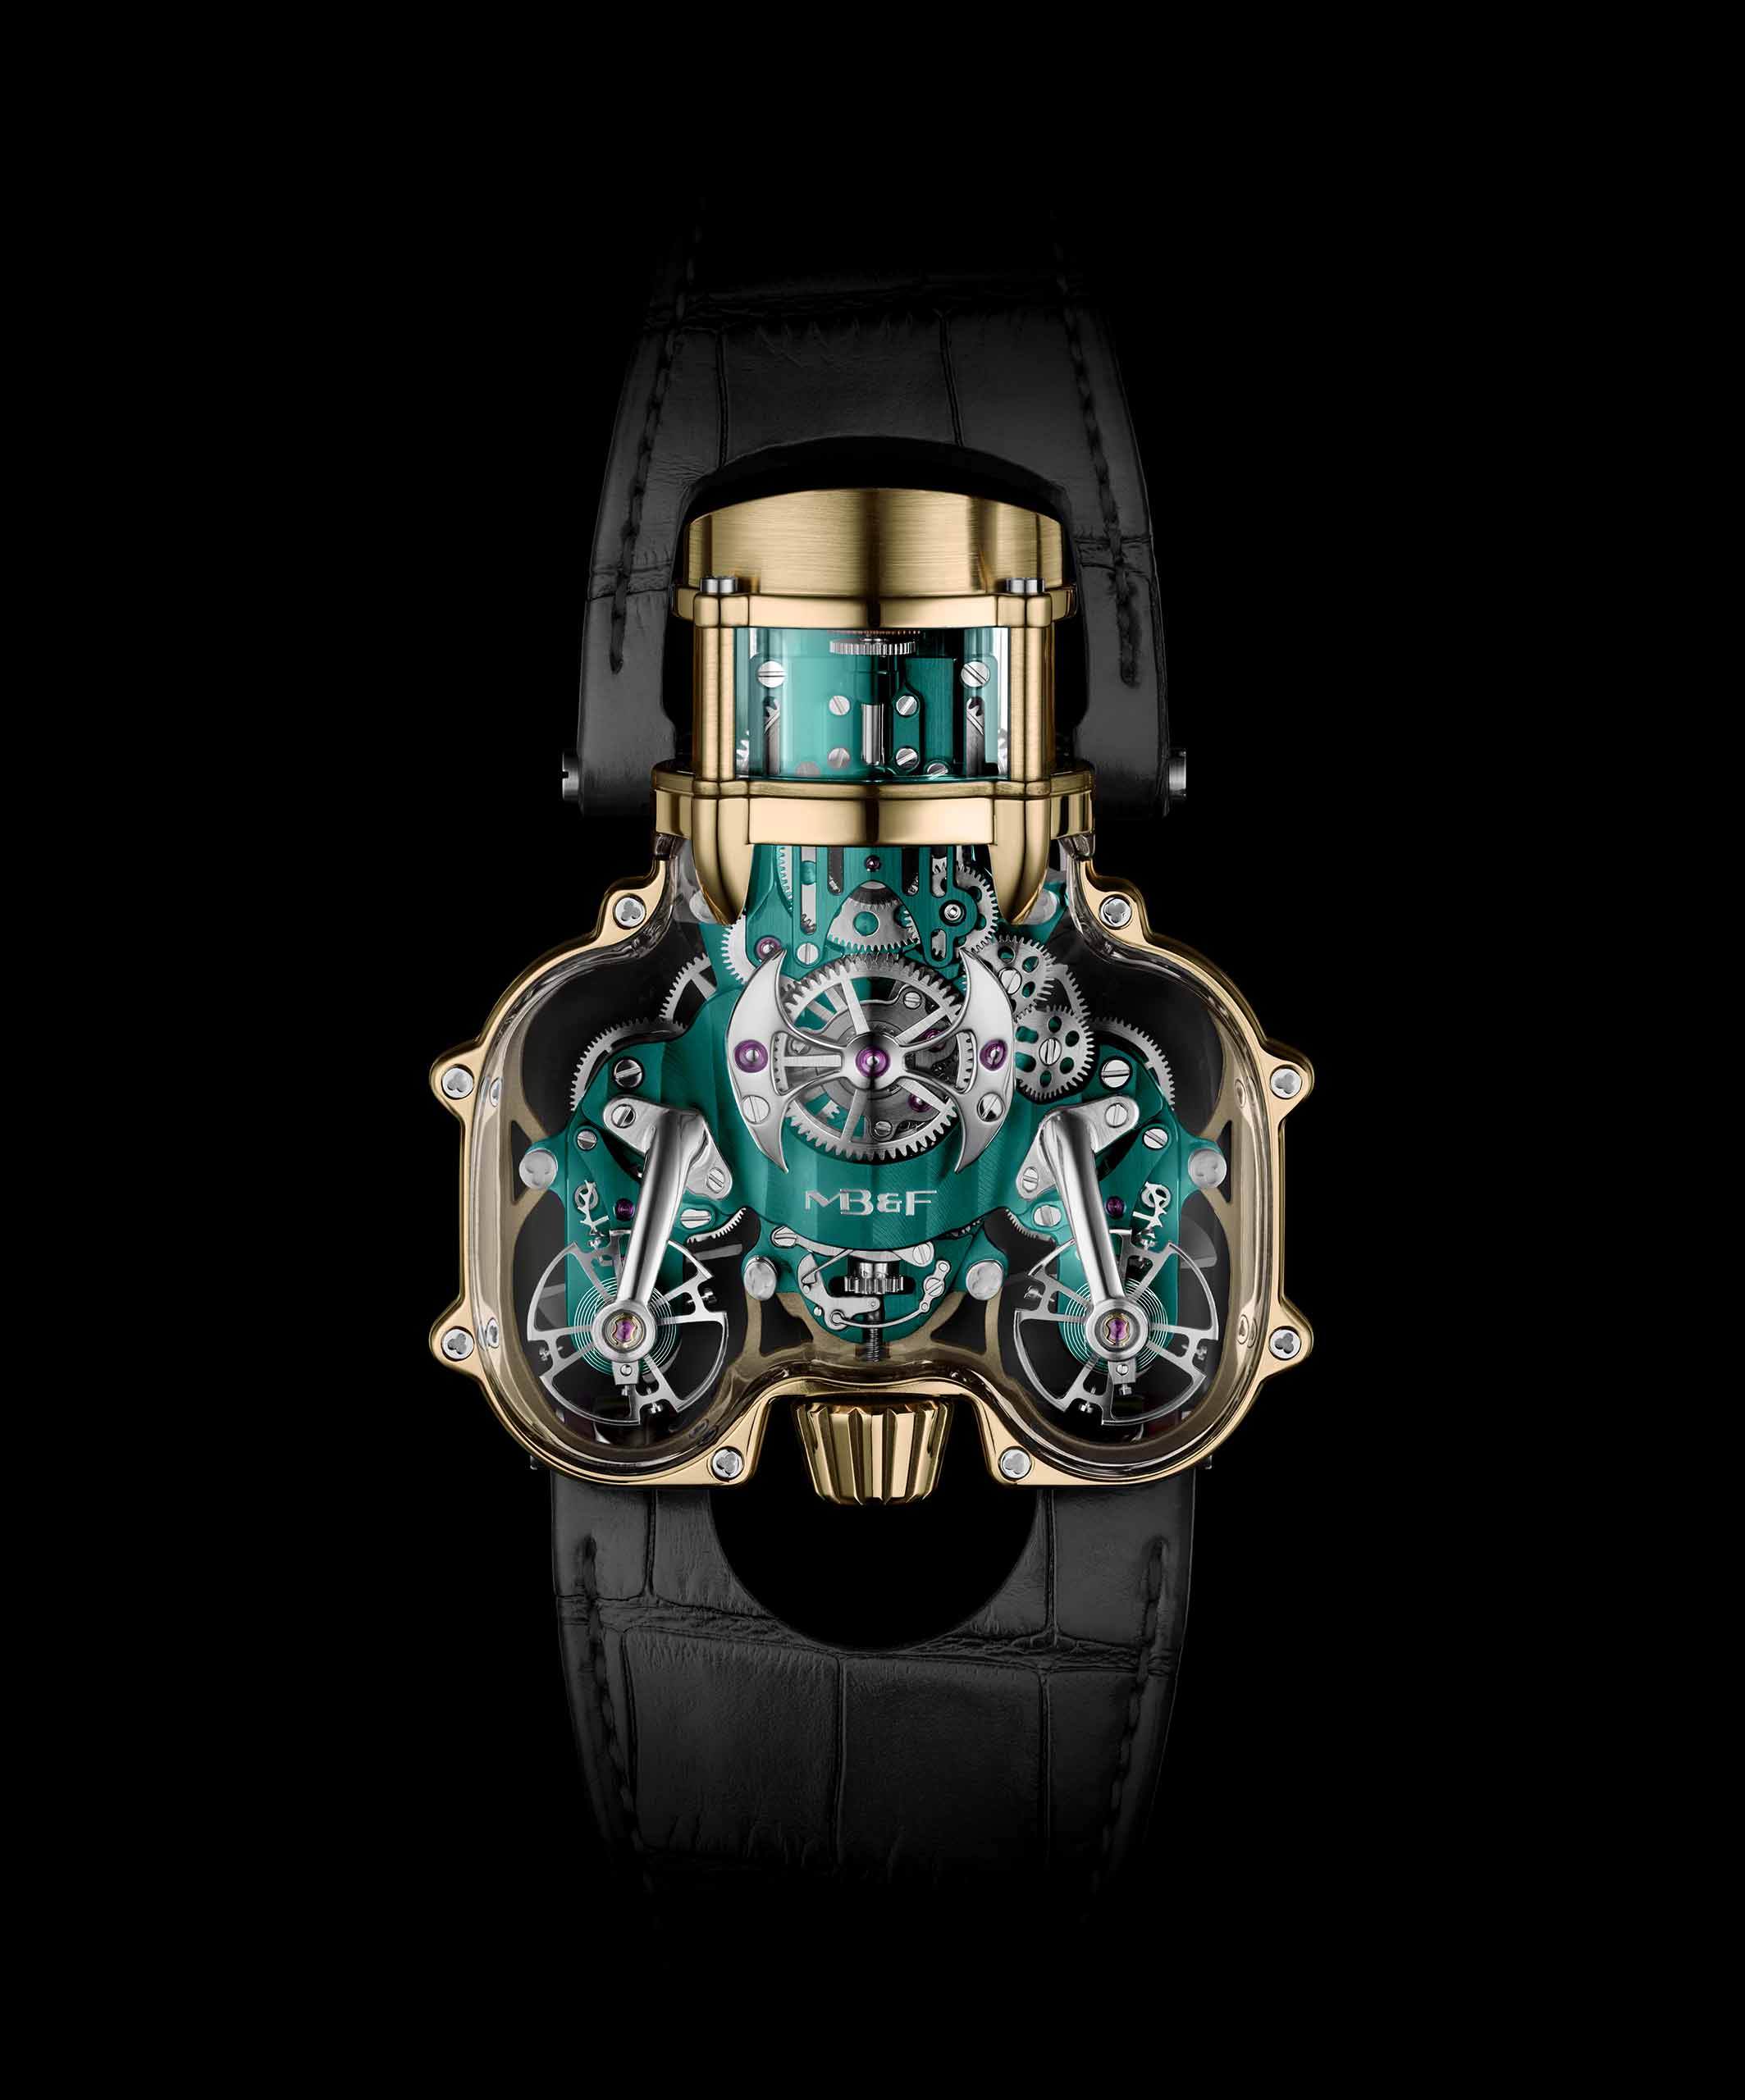 MB&F Stuns Again with the Incredible HM9 Sapphire Vision